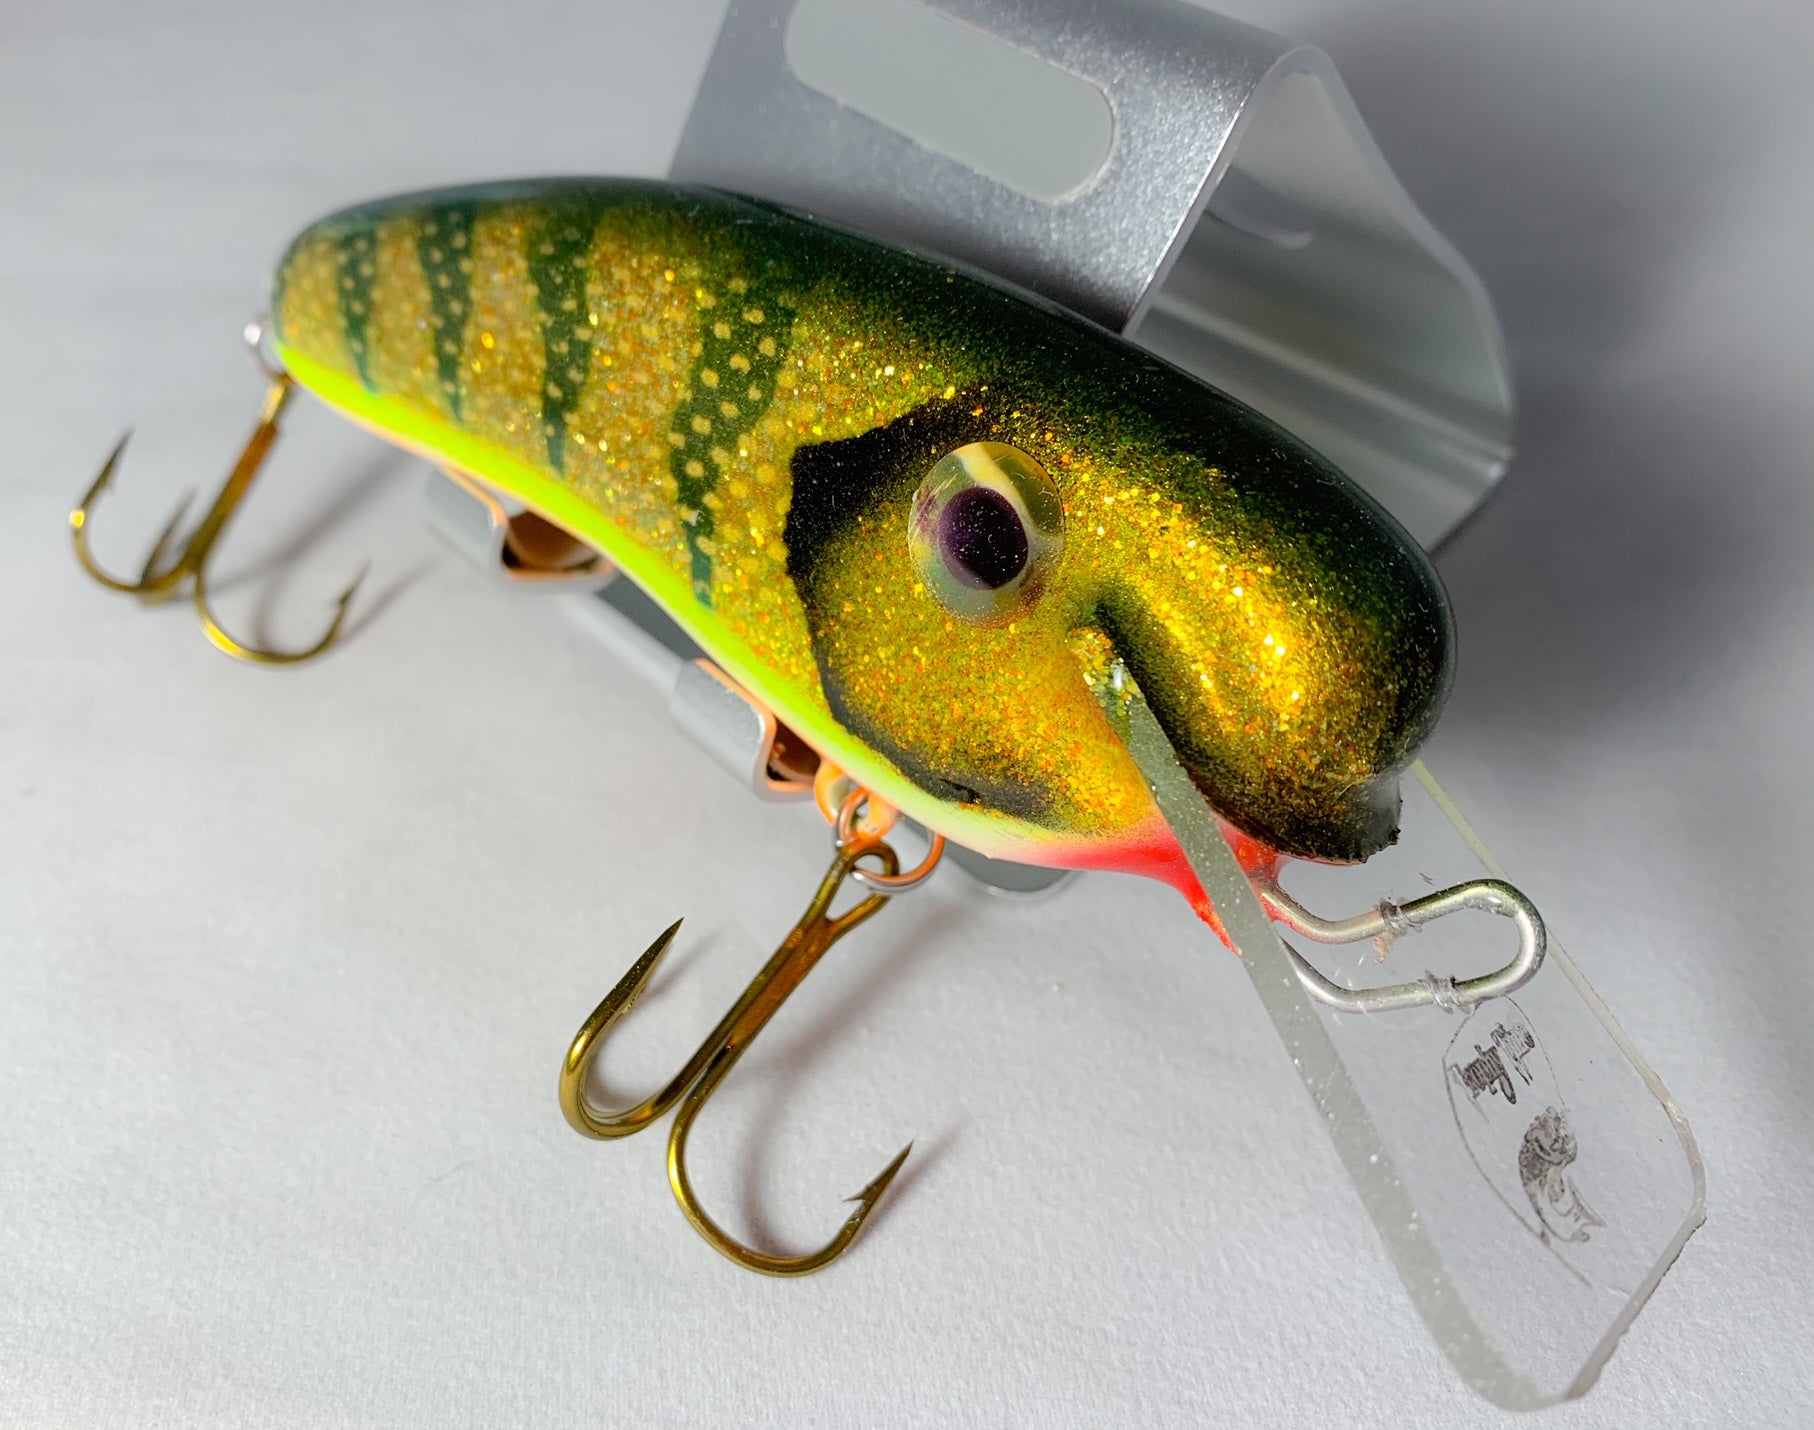 baitsanity and @tacklewarehouse are launching their co-developed